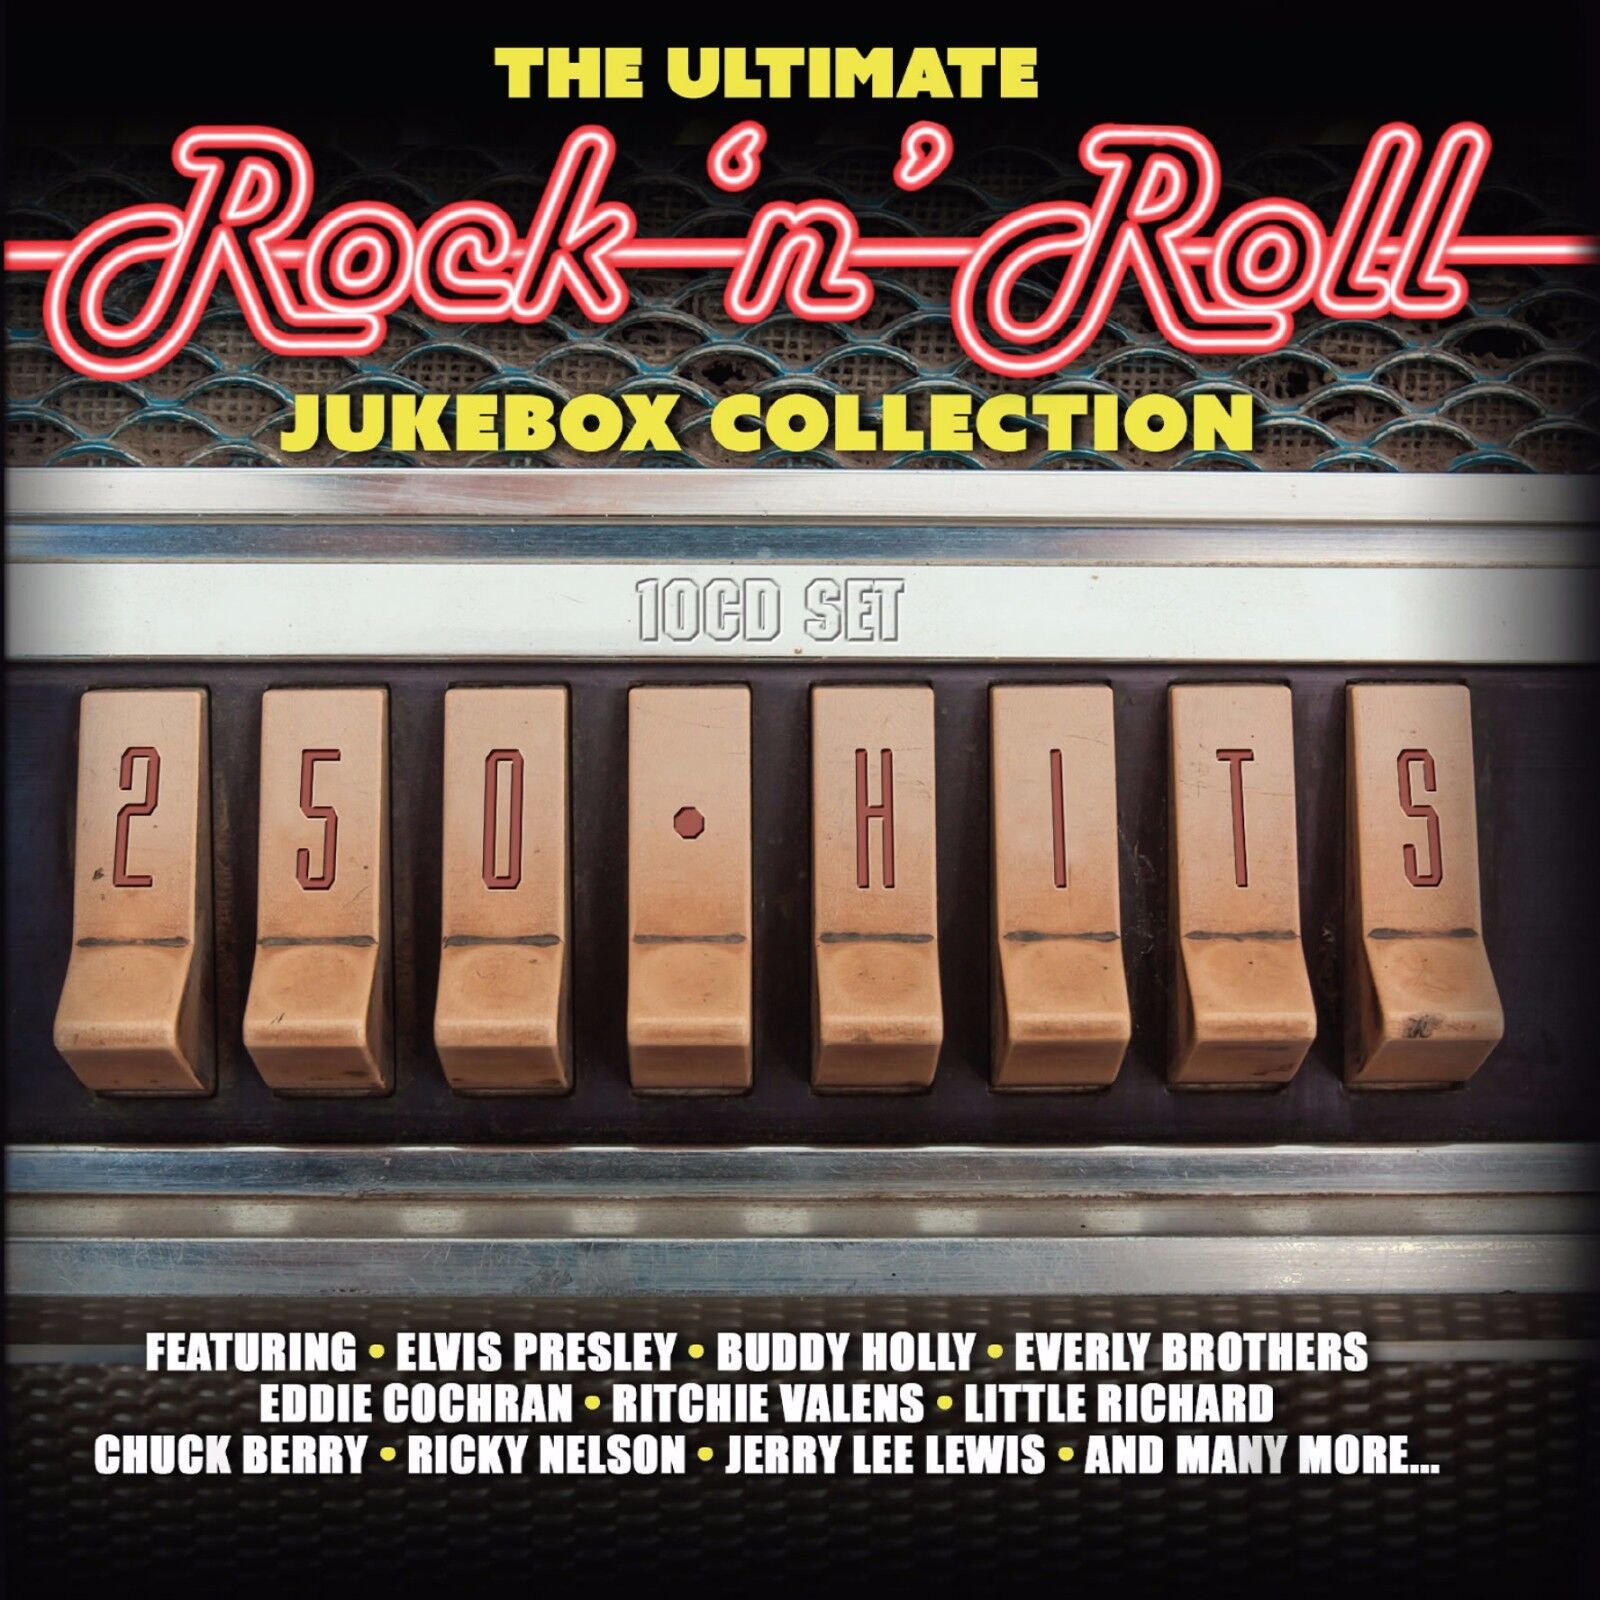 Rock n Roll 10 CDs 250 Hits The Ultimate Jukebox Collection Of 50s 60s Music New